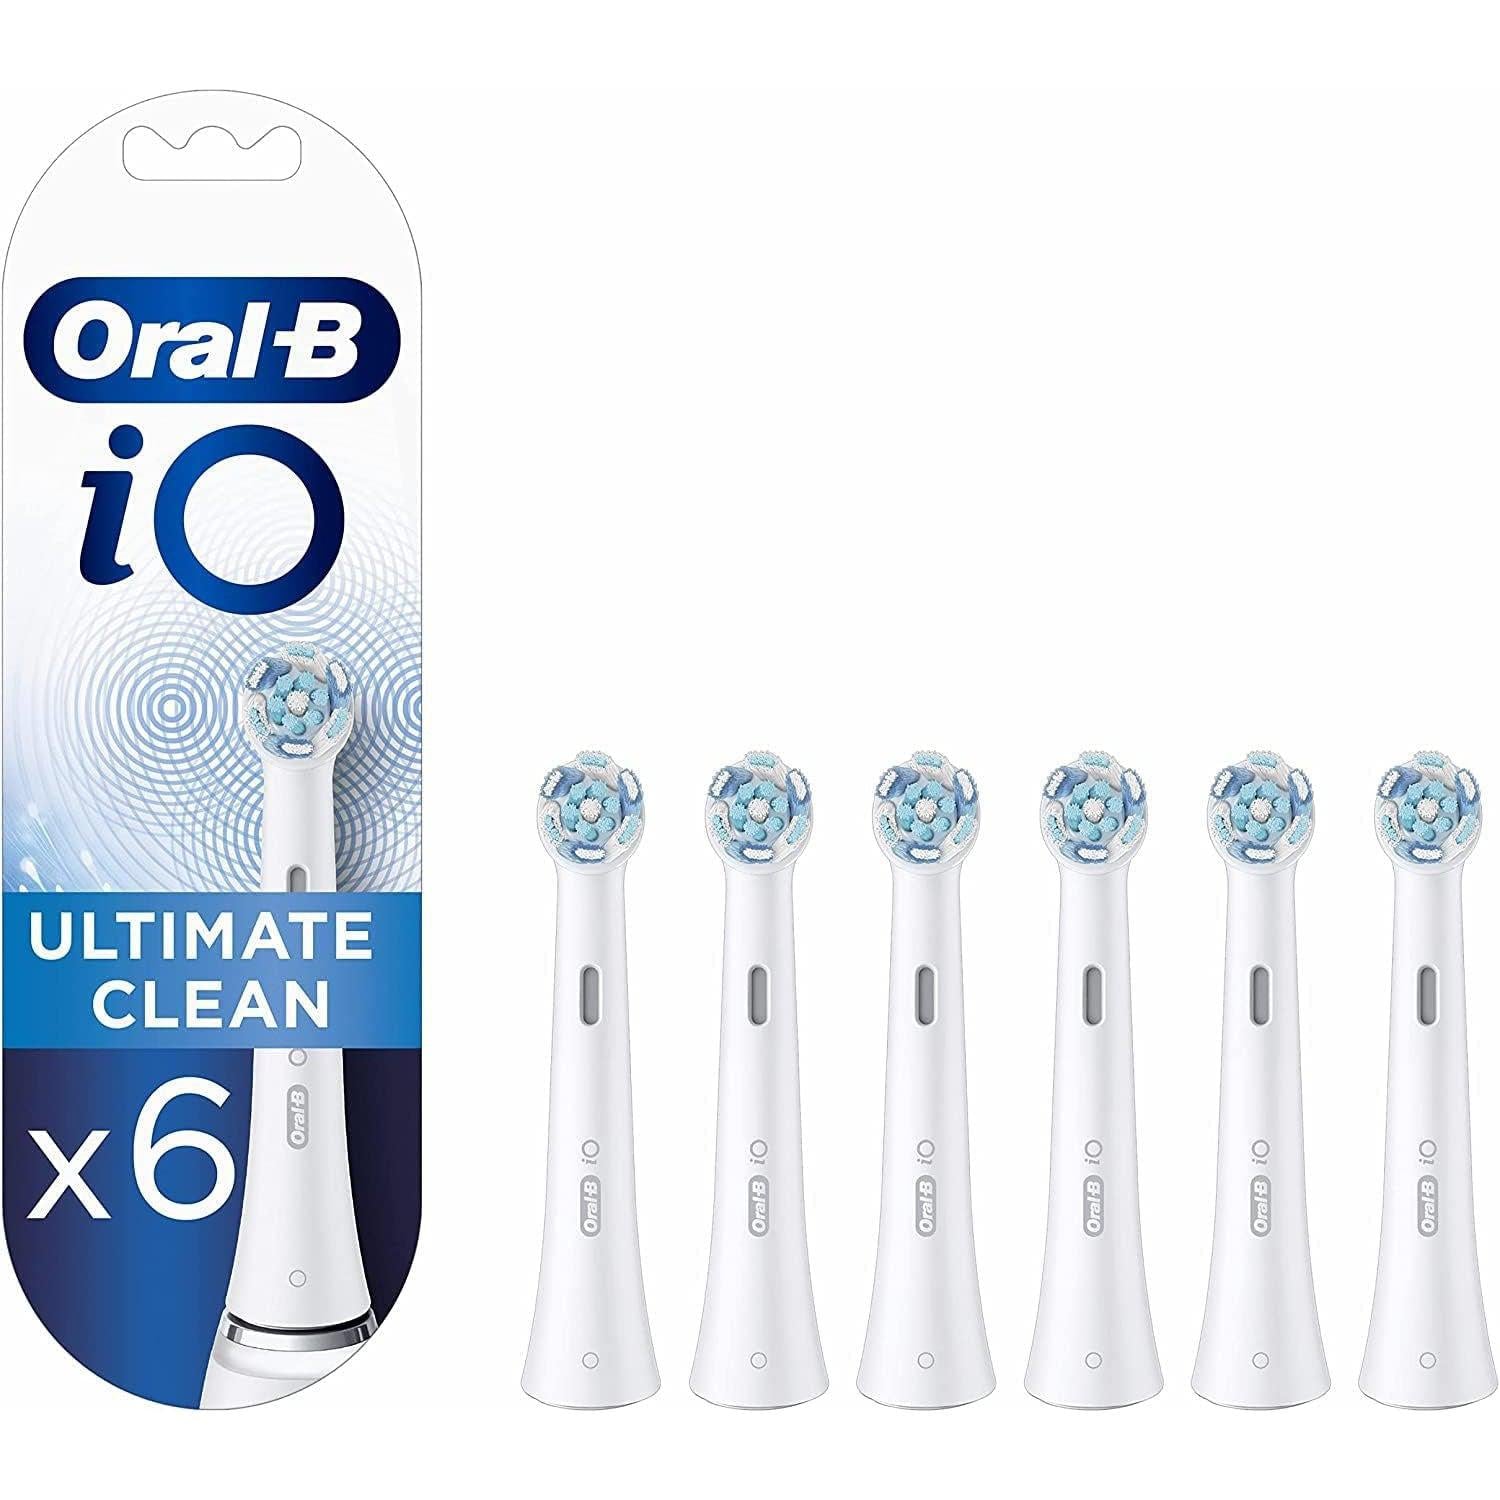 Oral-B iO 6pk Ultimate Clean Toothbrush Replacement Heads - White - Healthxpress.ie